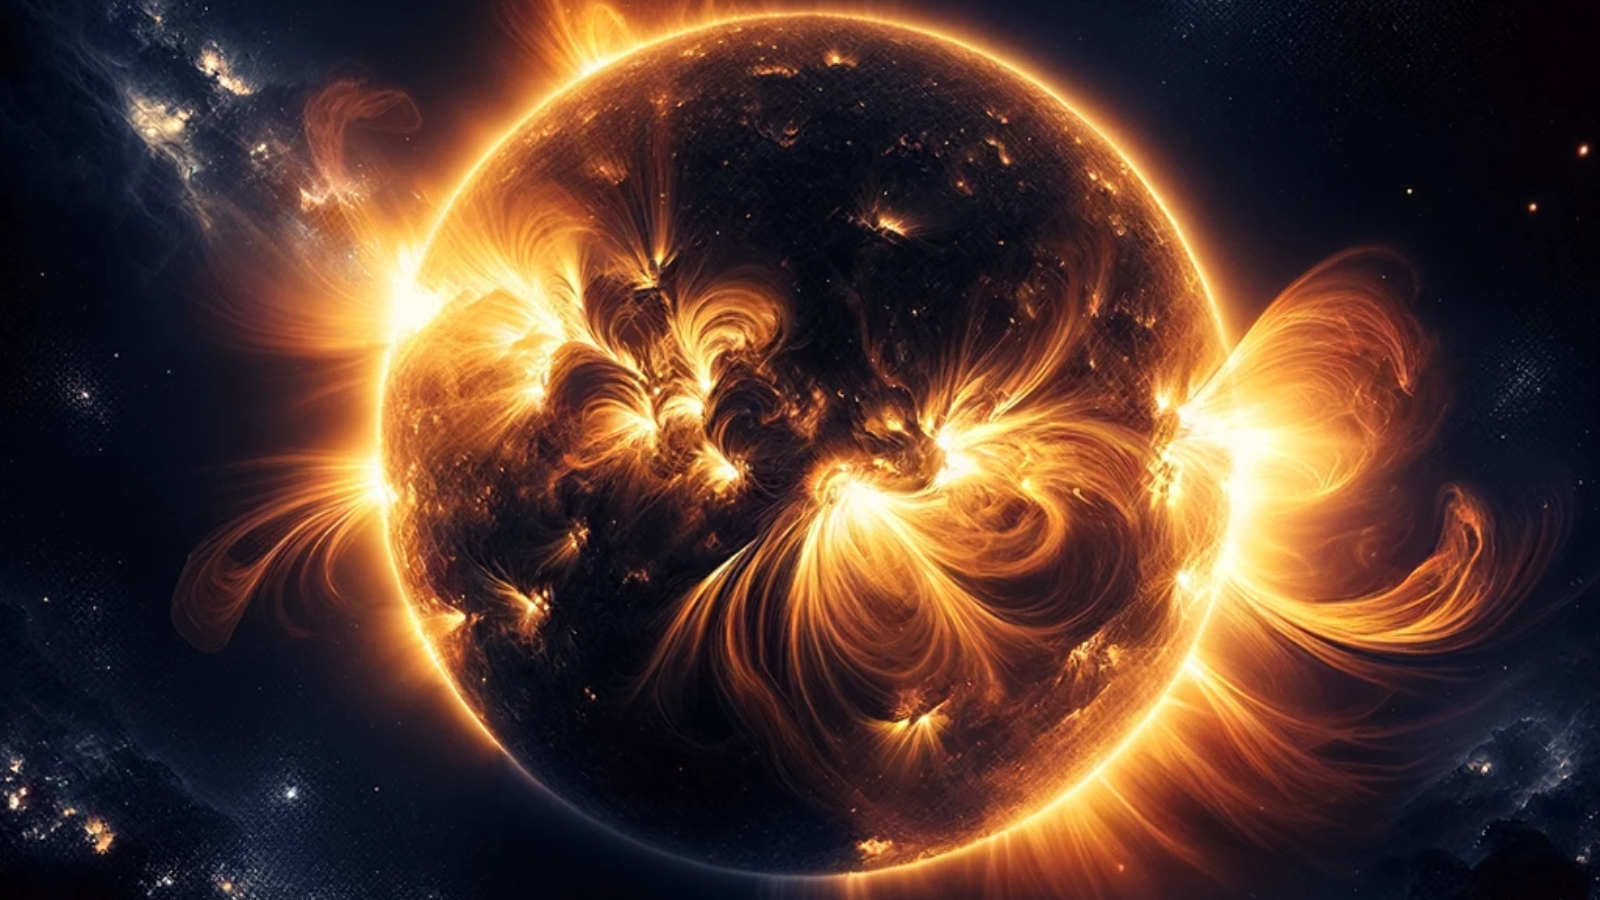 The Next Solar Storm Cycle Could Massively Disrupt the Internet